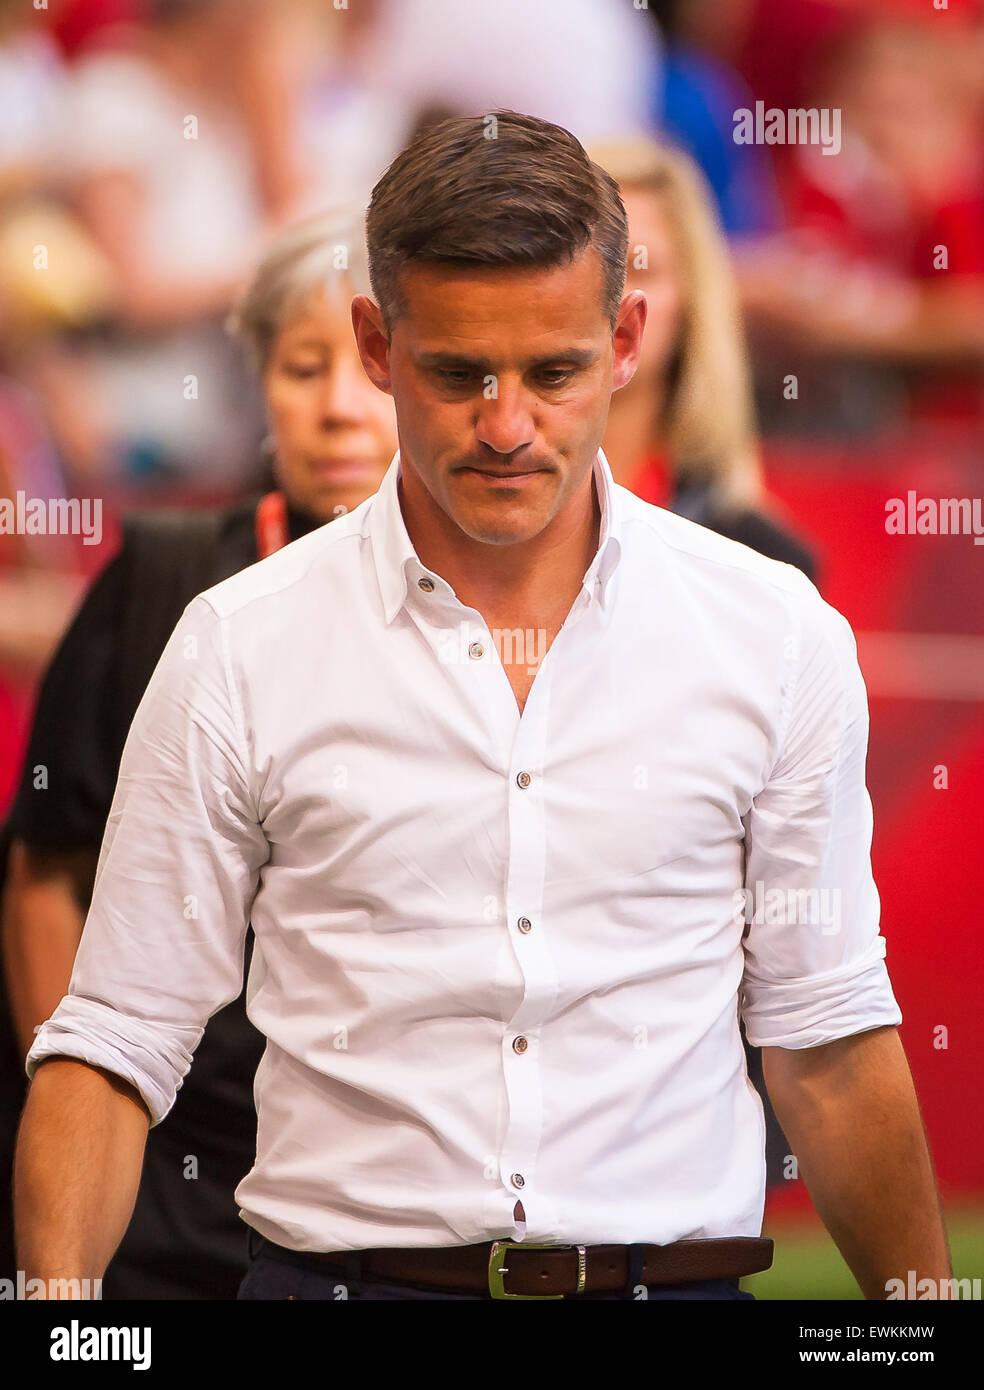 Vancouver, Canada. 27th June, 2015. Canada coach John Hurdman following the quarterfinal match between Canada and England at the FIFA Women's World Cup Canada 2015 at BC Place Stadium. England won the match 2-1. Credit:  Matt Jacques/Alamy Live News Stock Photo